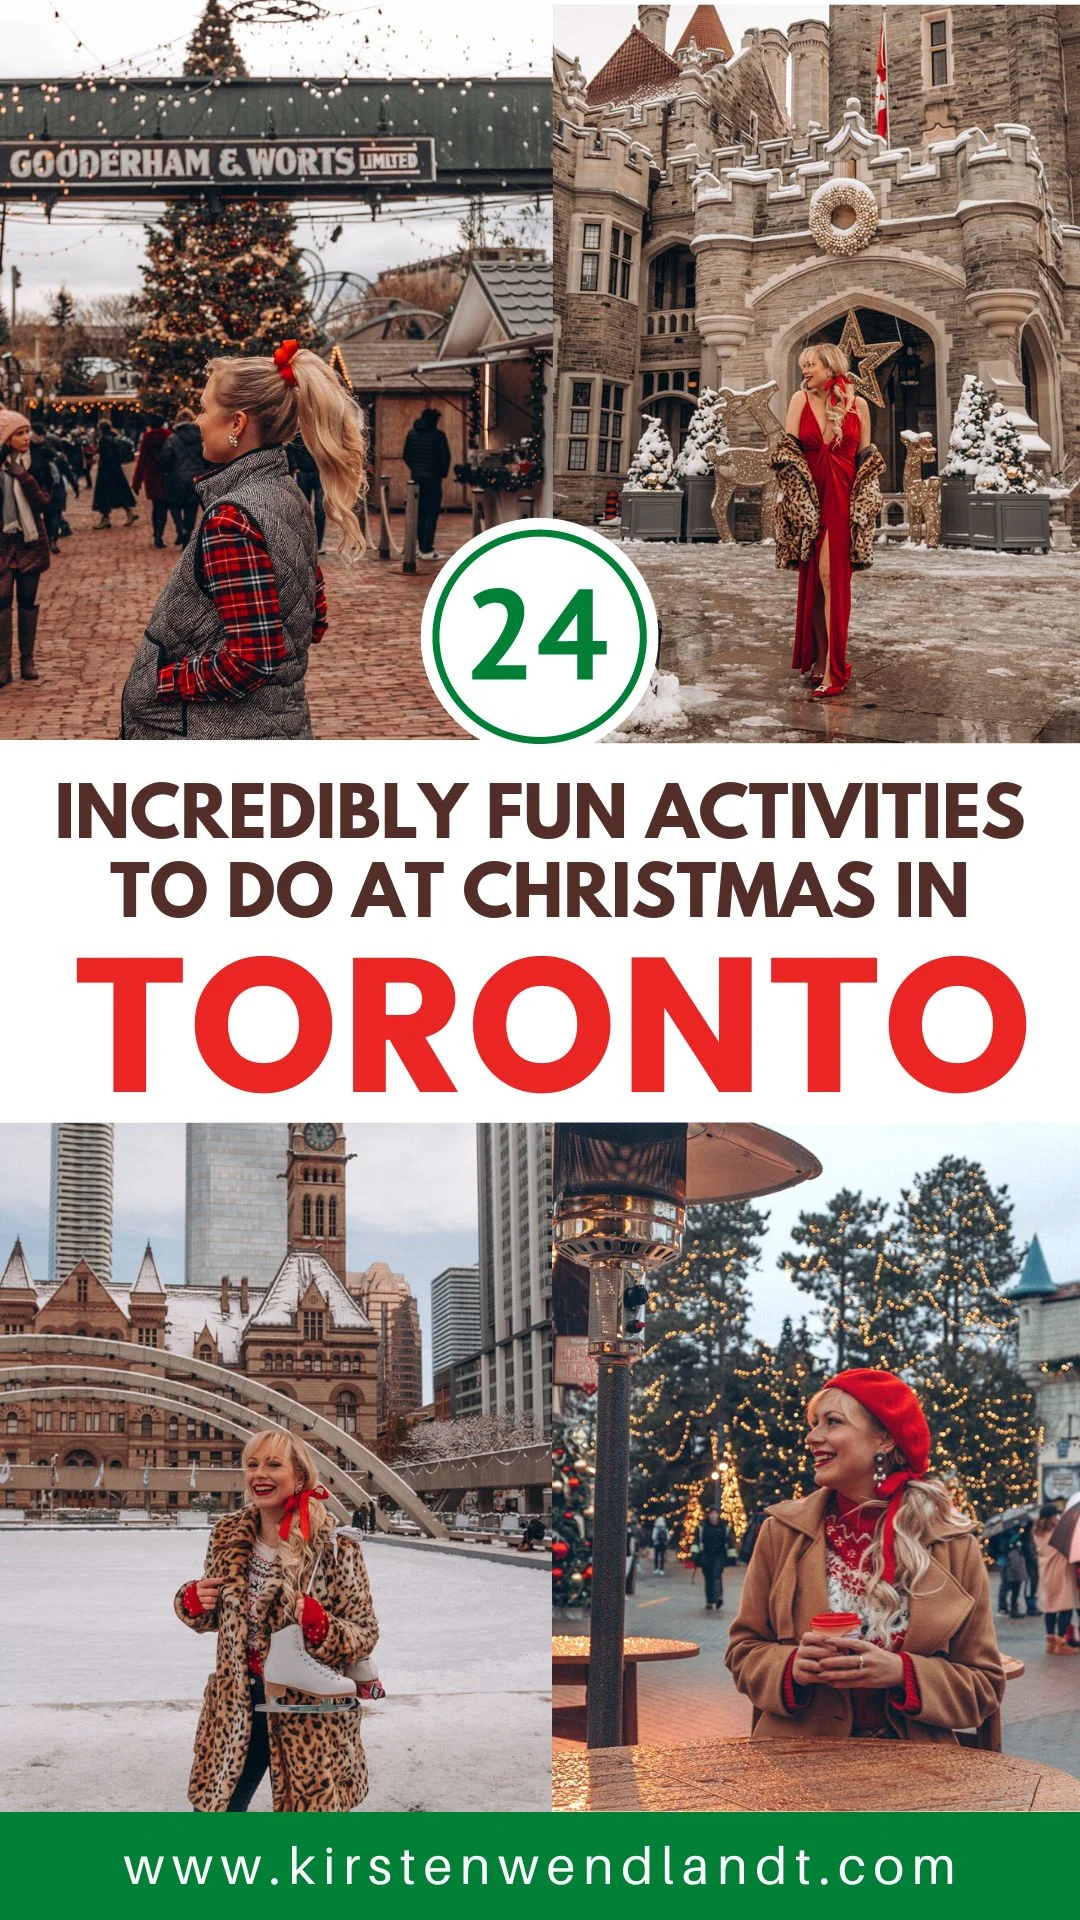 Looking for some fun things to do at Christmas in Toronto this holiday season? This guide is for you! Toronto has so many incredibly fun & festive activities to do during the Christmas season. From festive pop up bars to family friendly fun, this guide has you covered to get the most out of the Christmas season in Toronto!